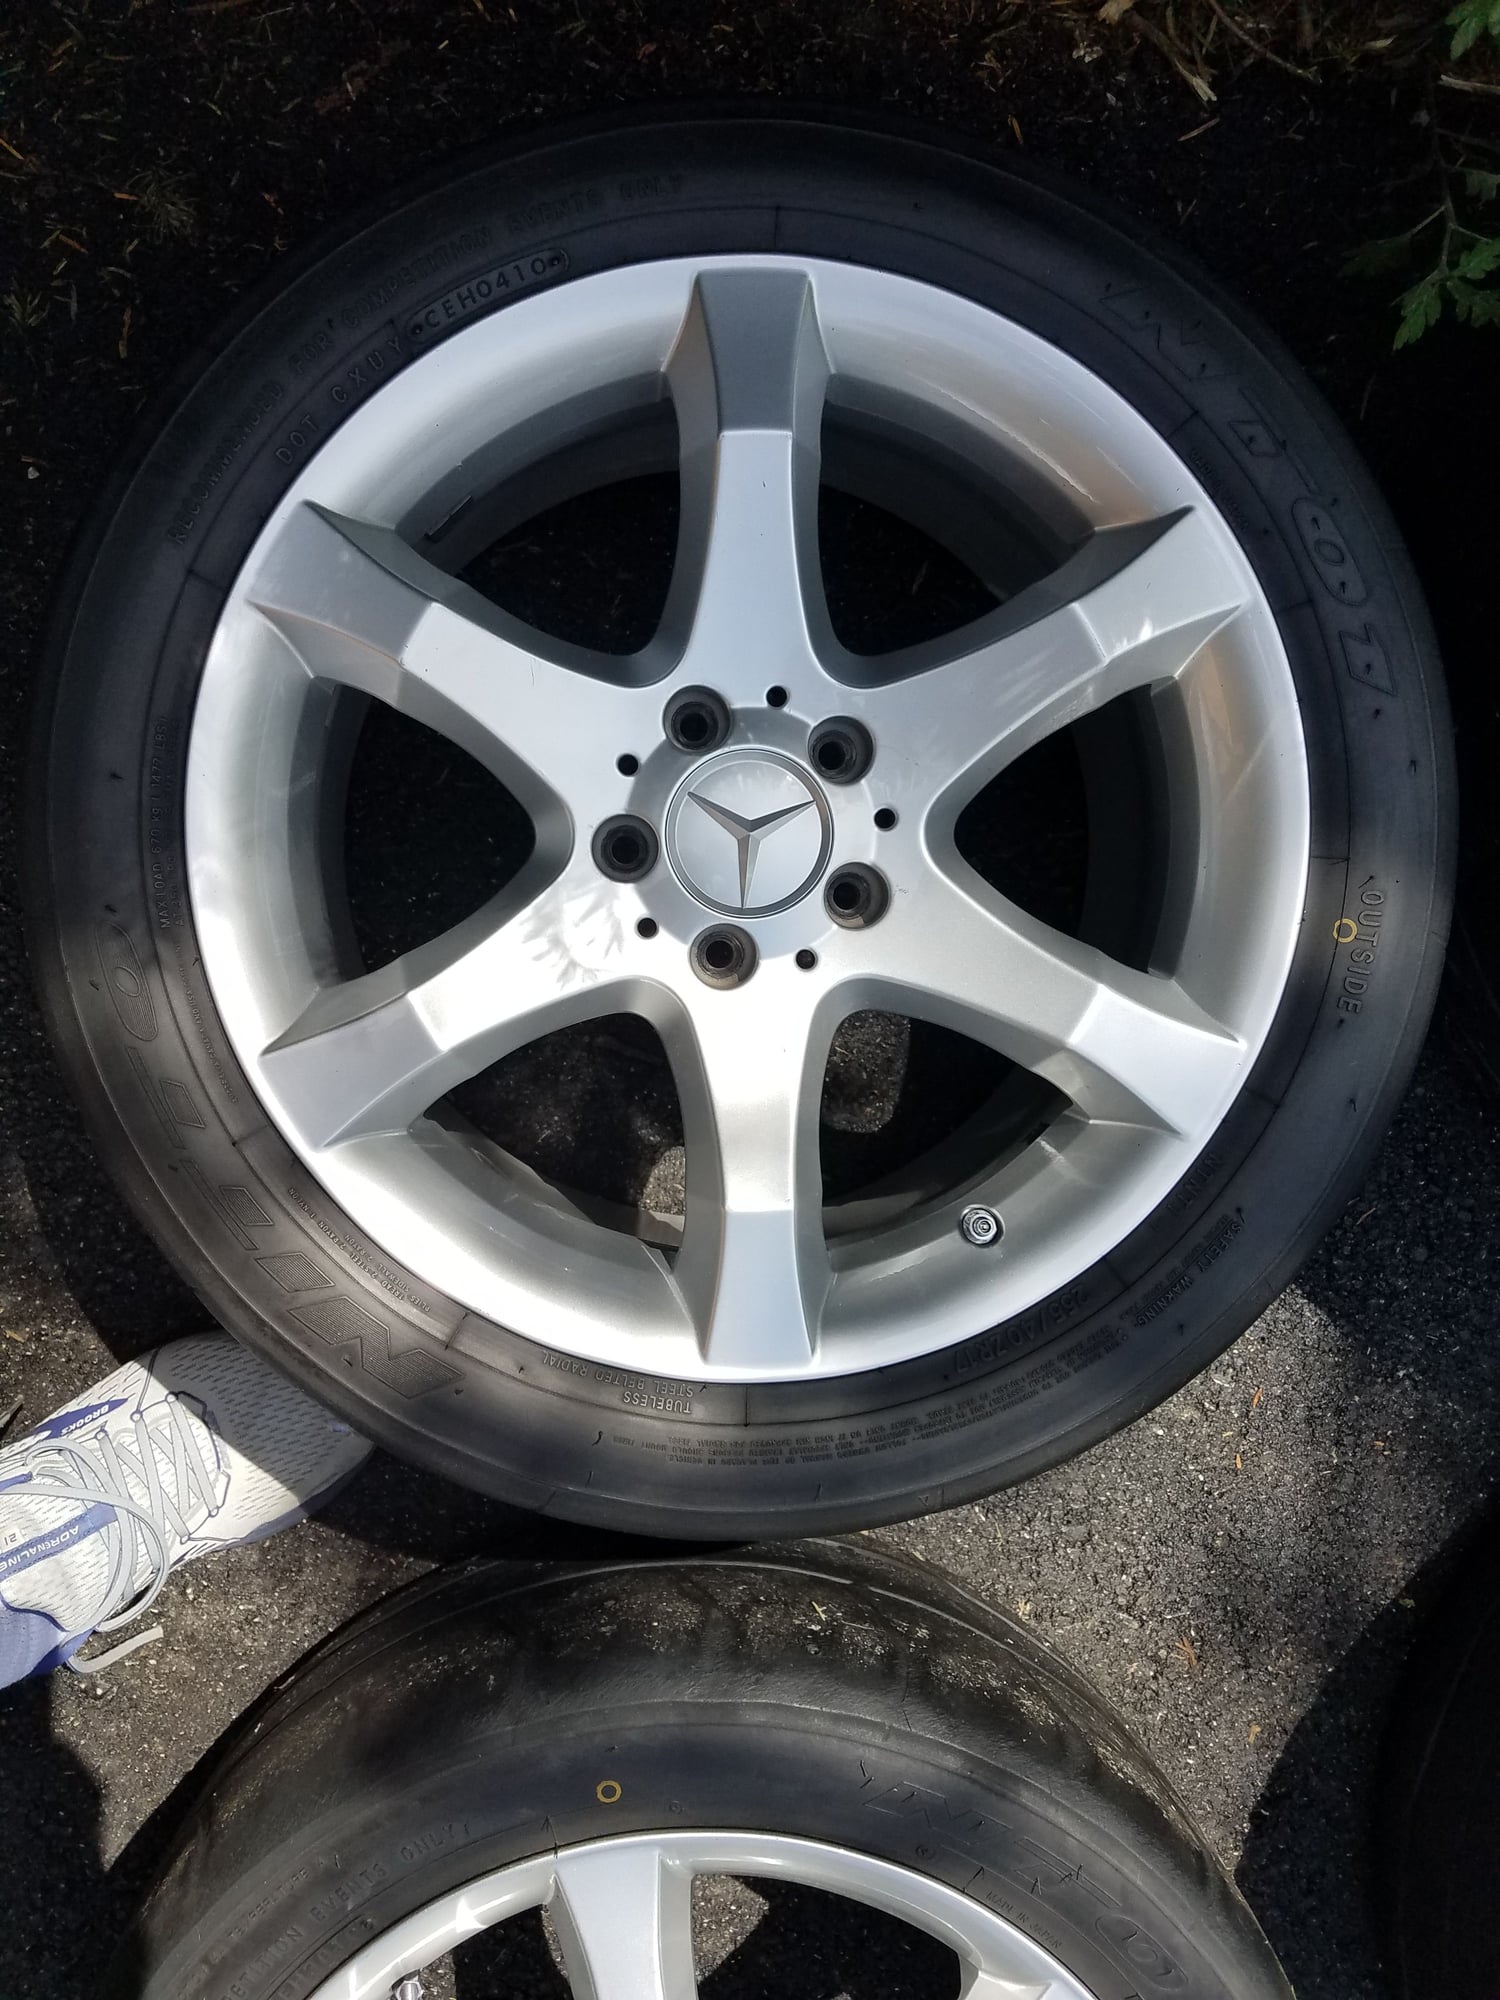 Wheels and Tires/Axles - Mercedes 17" wheels - Used - 2002 to 2021 Mercedes-Benz C230 - Canal Winchester, OH 43110, United States